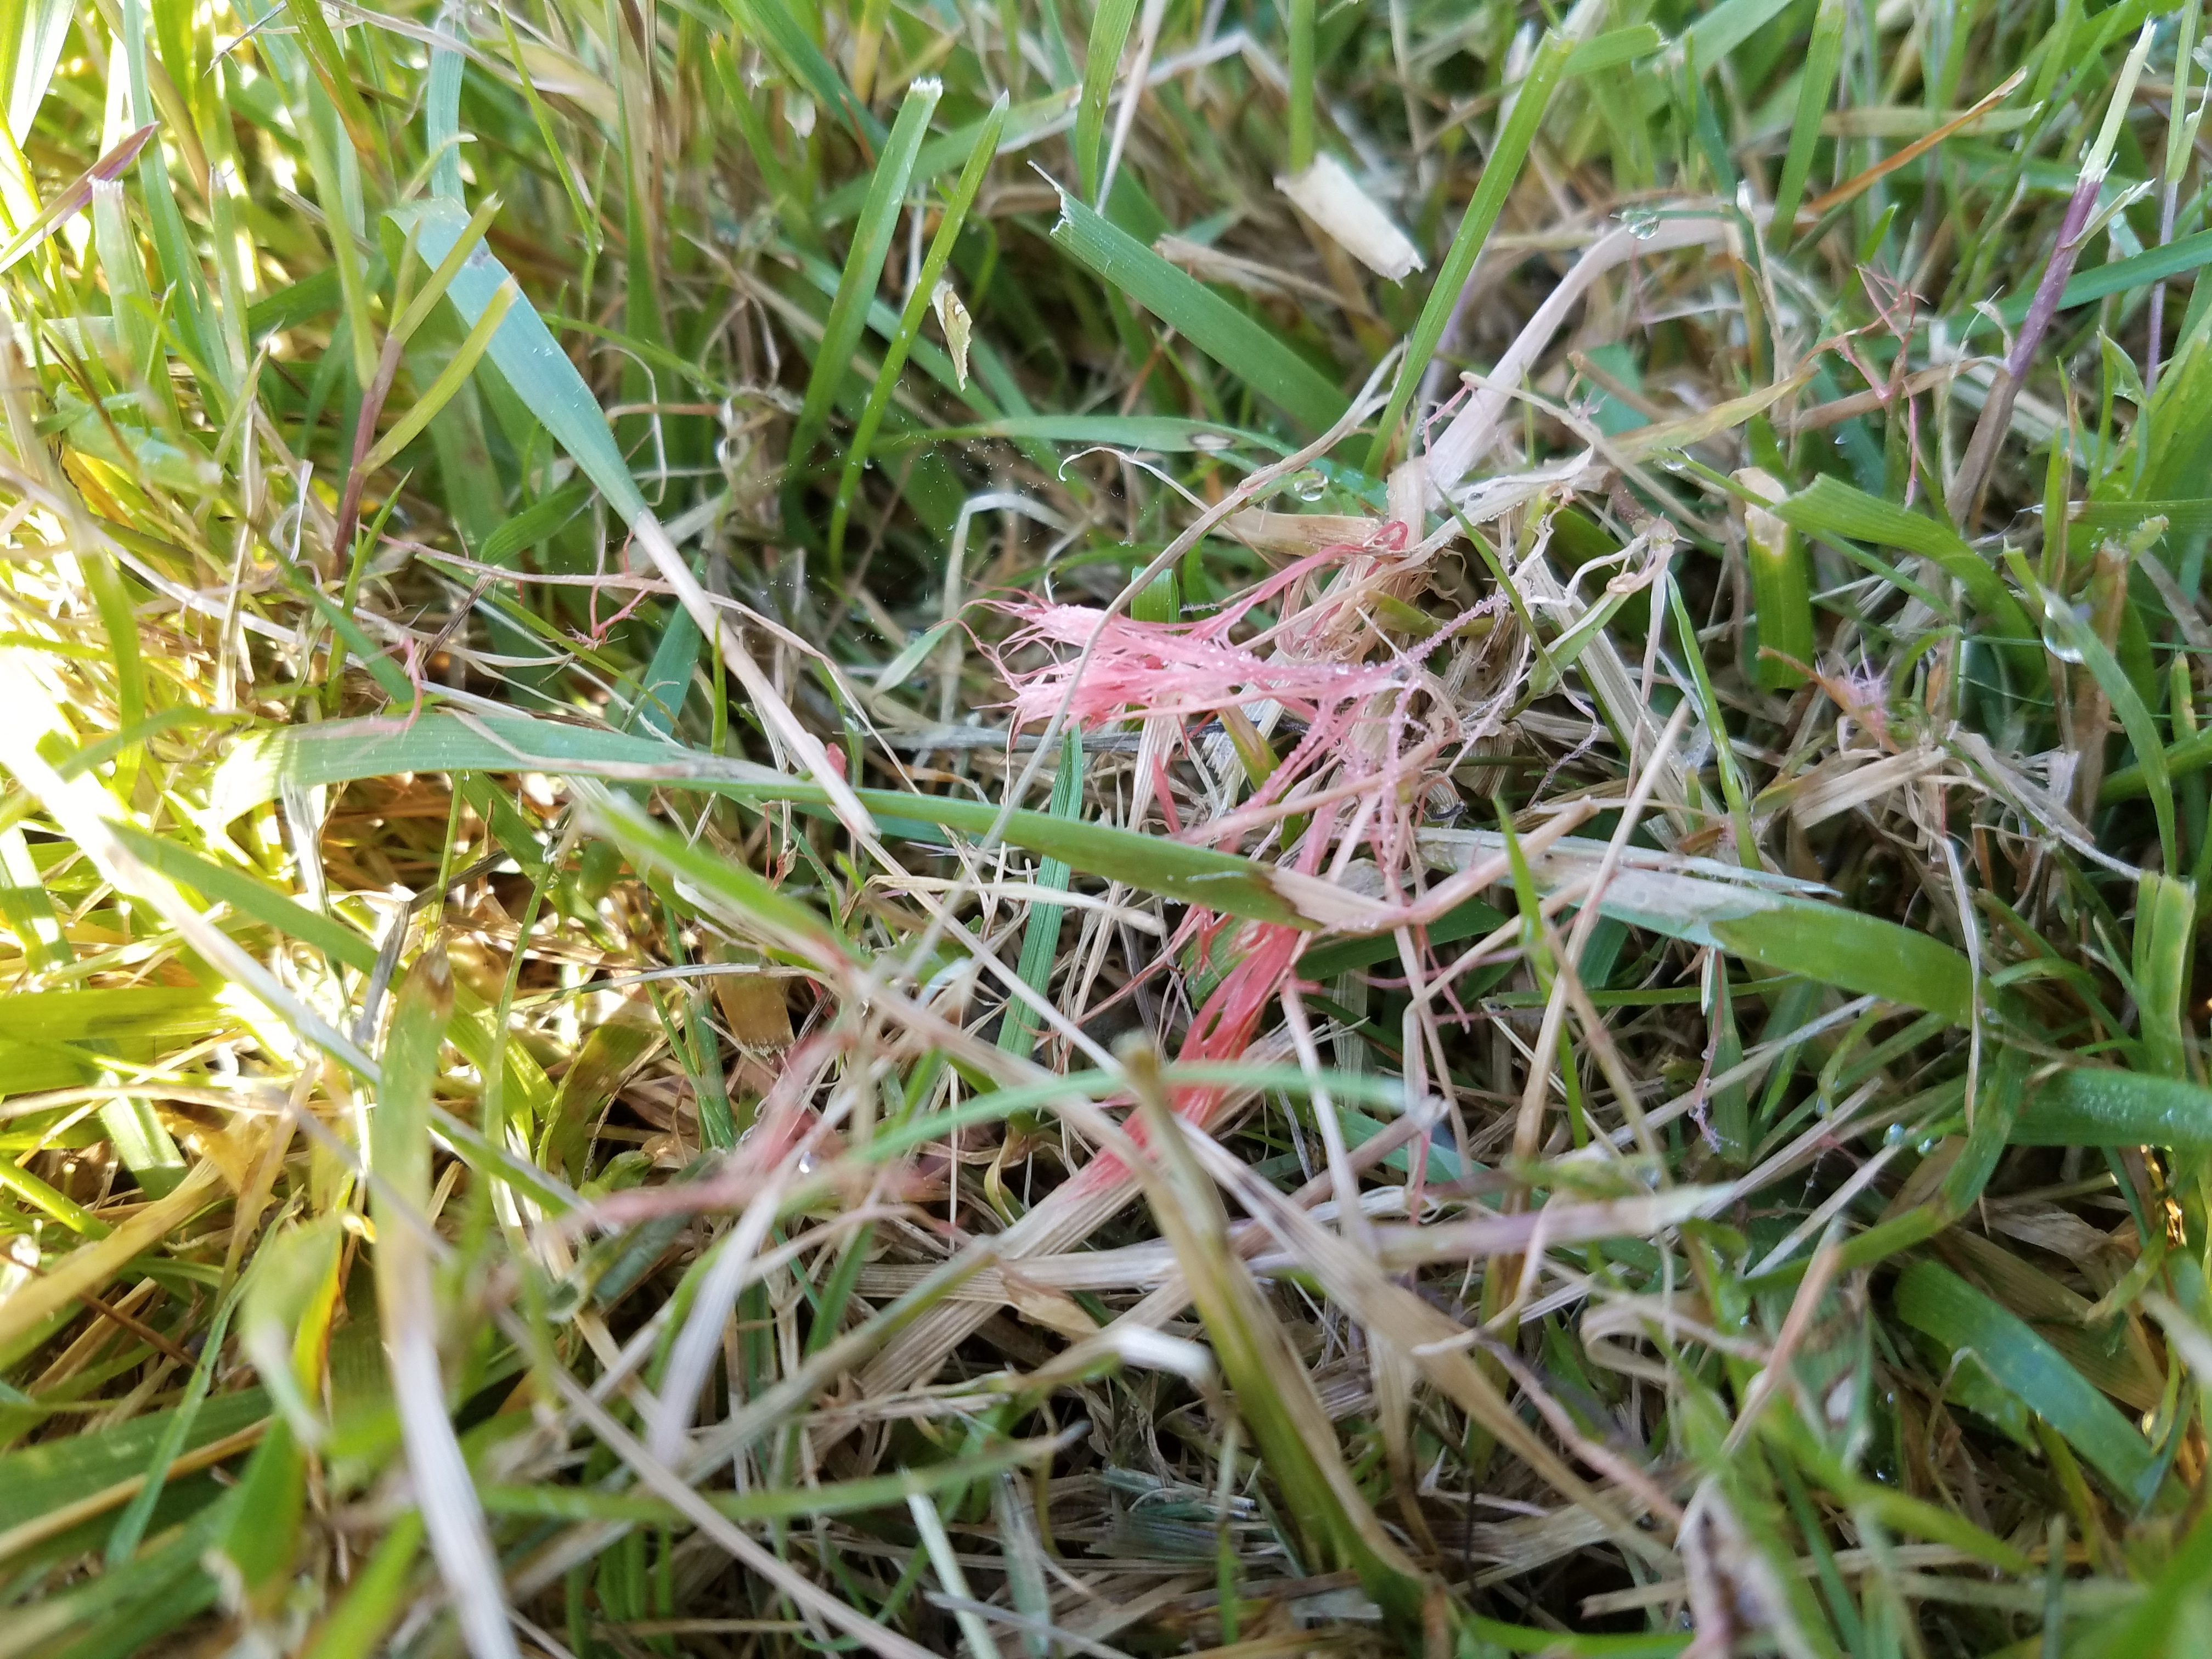 How can I manage red thread in my lawn?